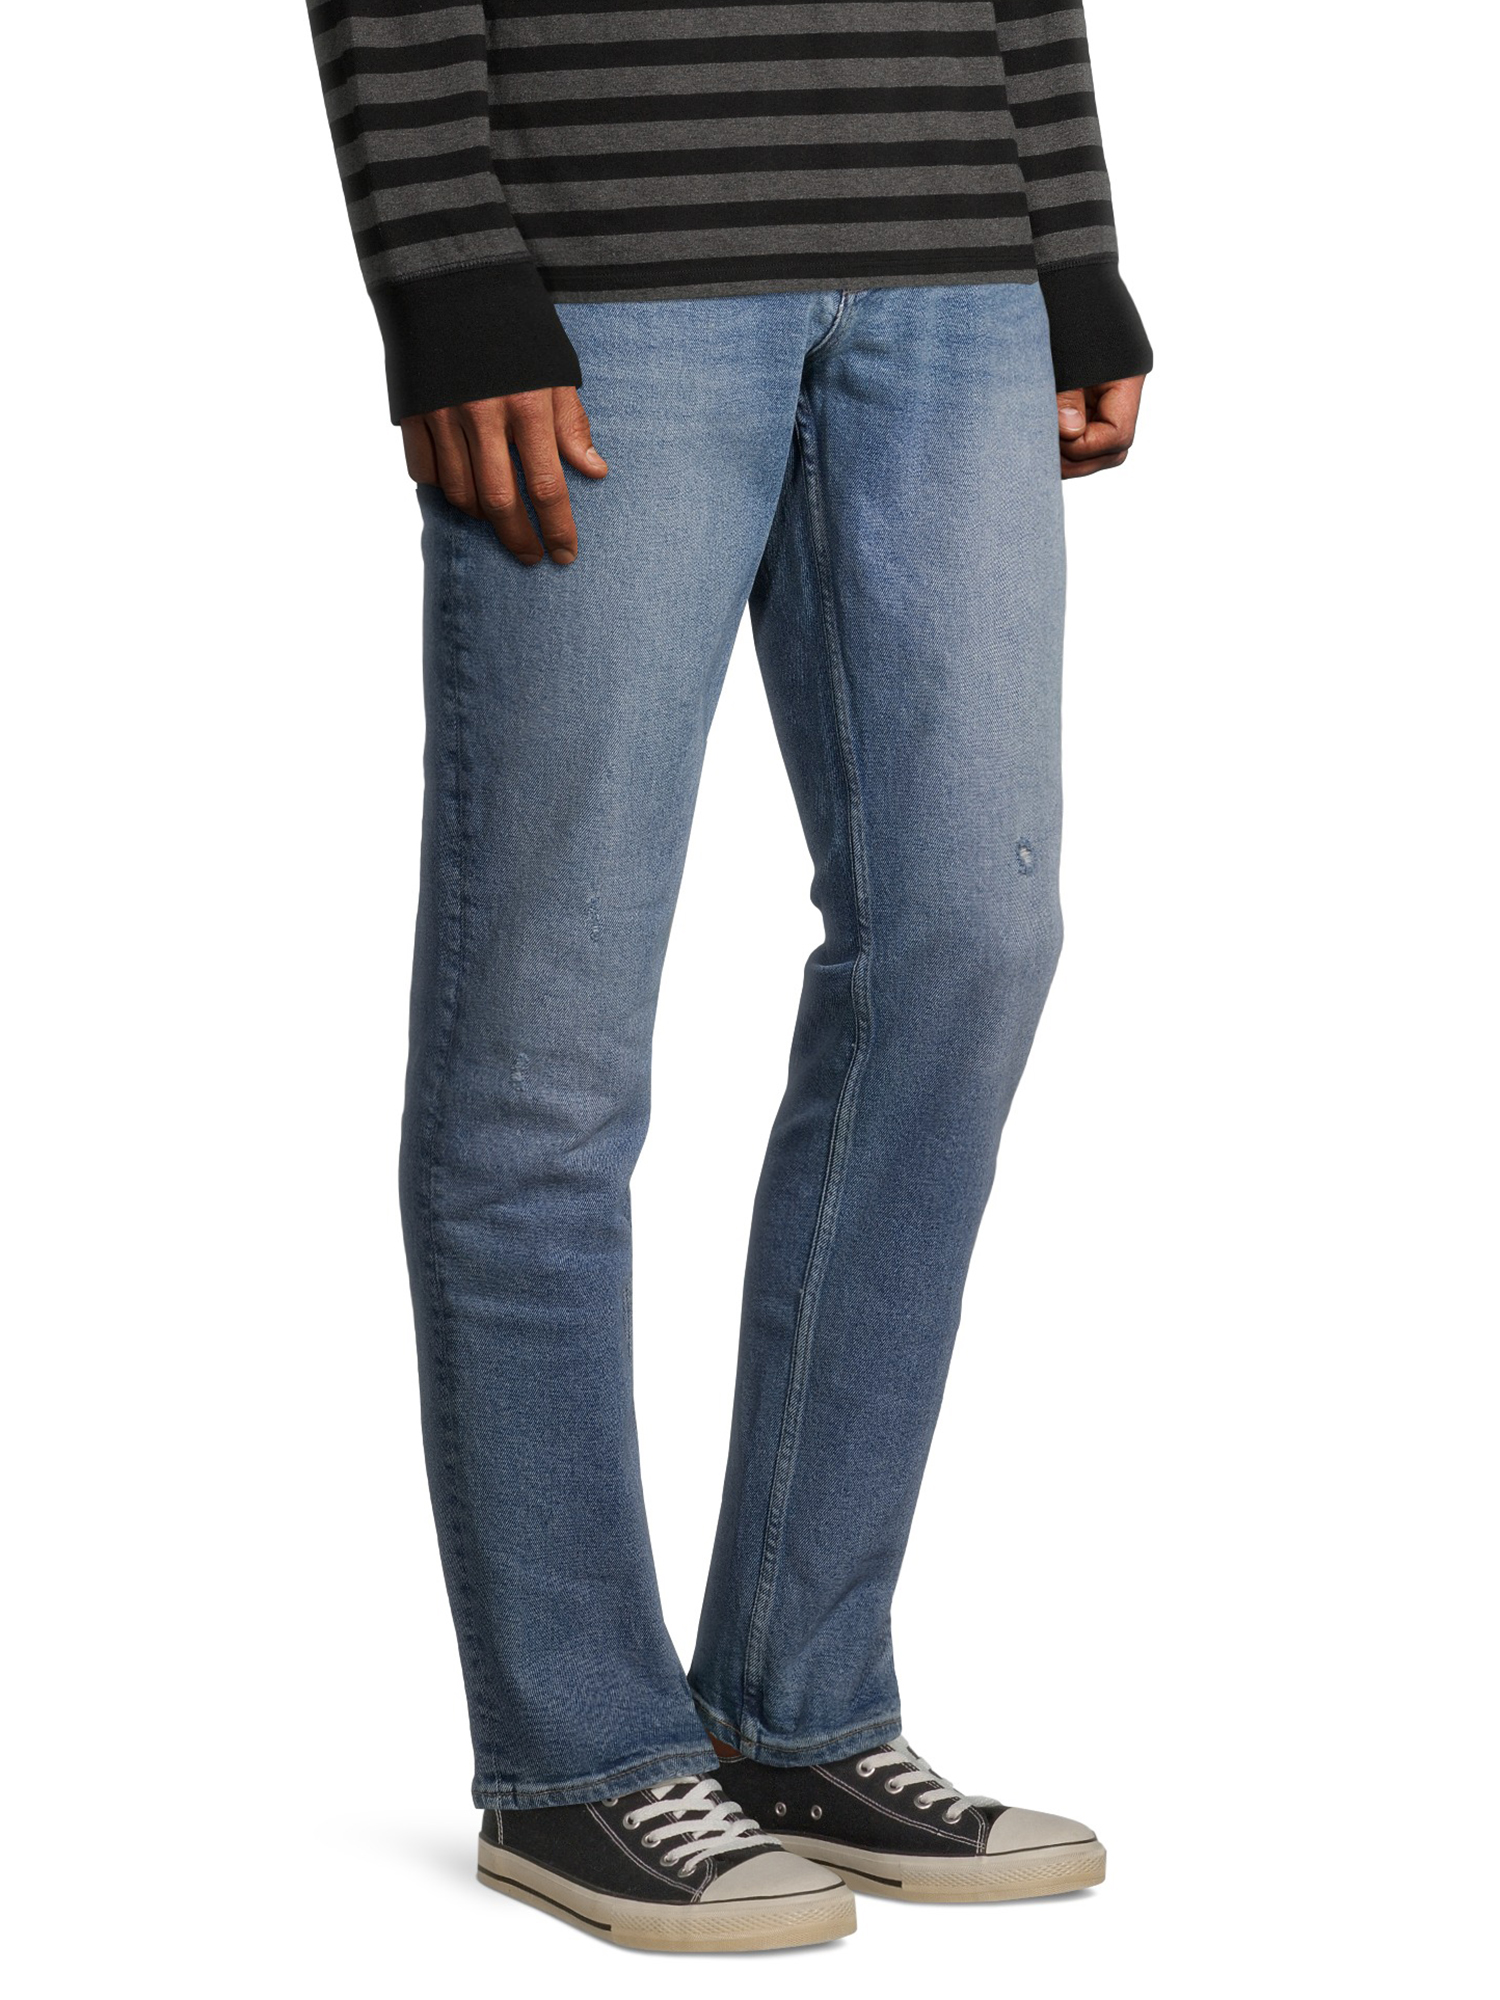 Free Assembly Men's Athletic Fit Jeans - image 3 of 7